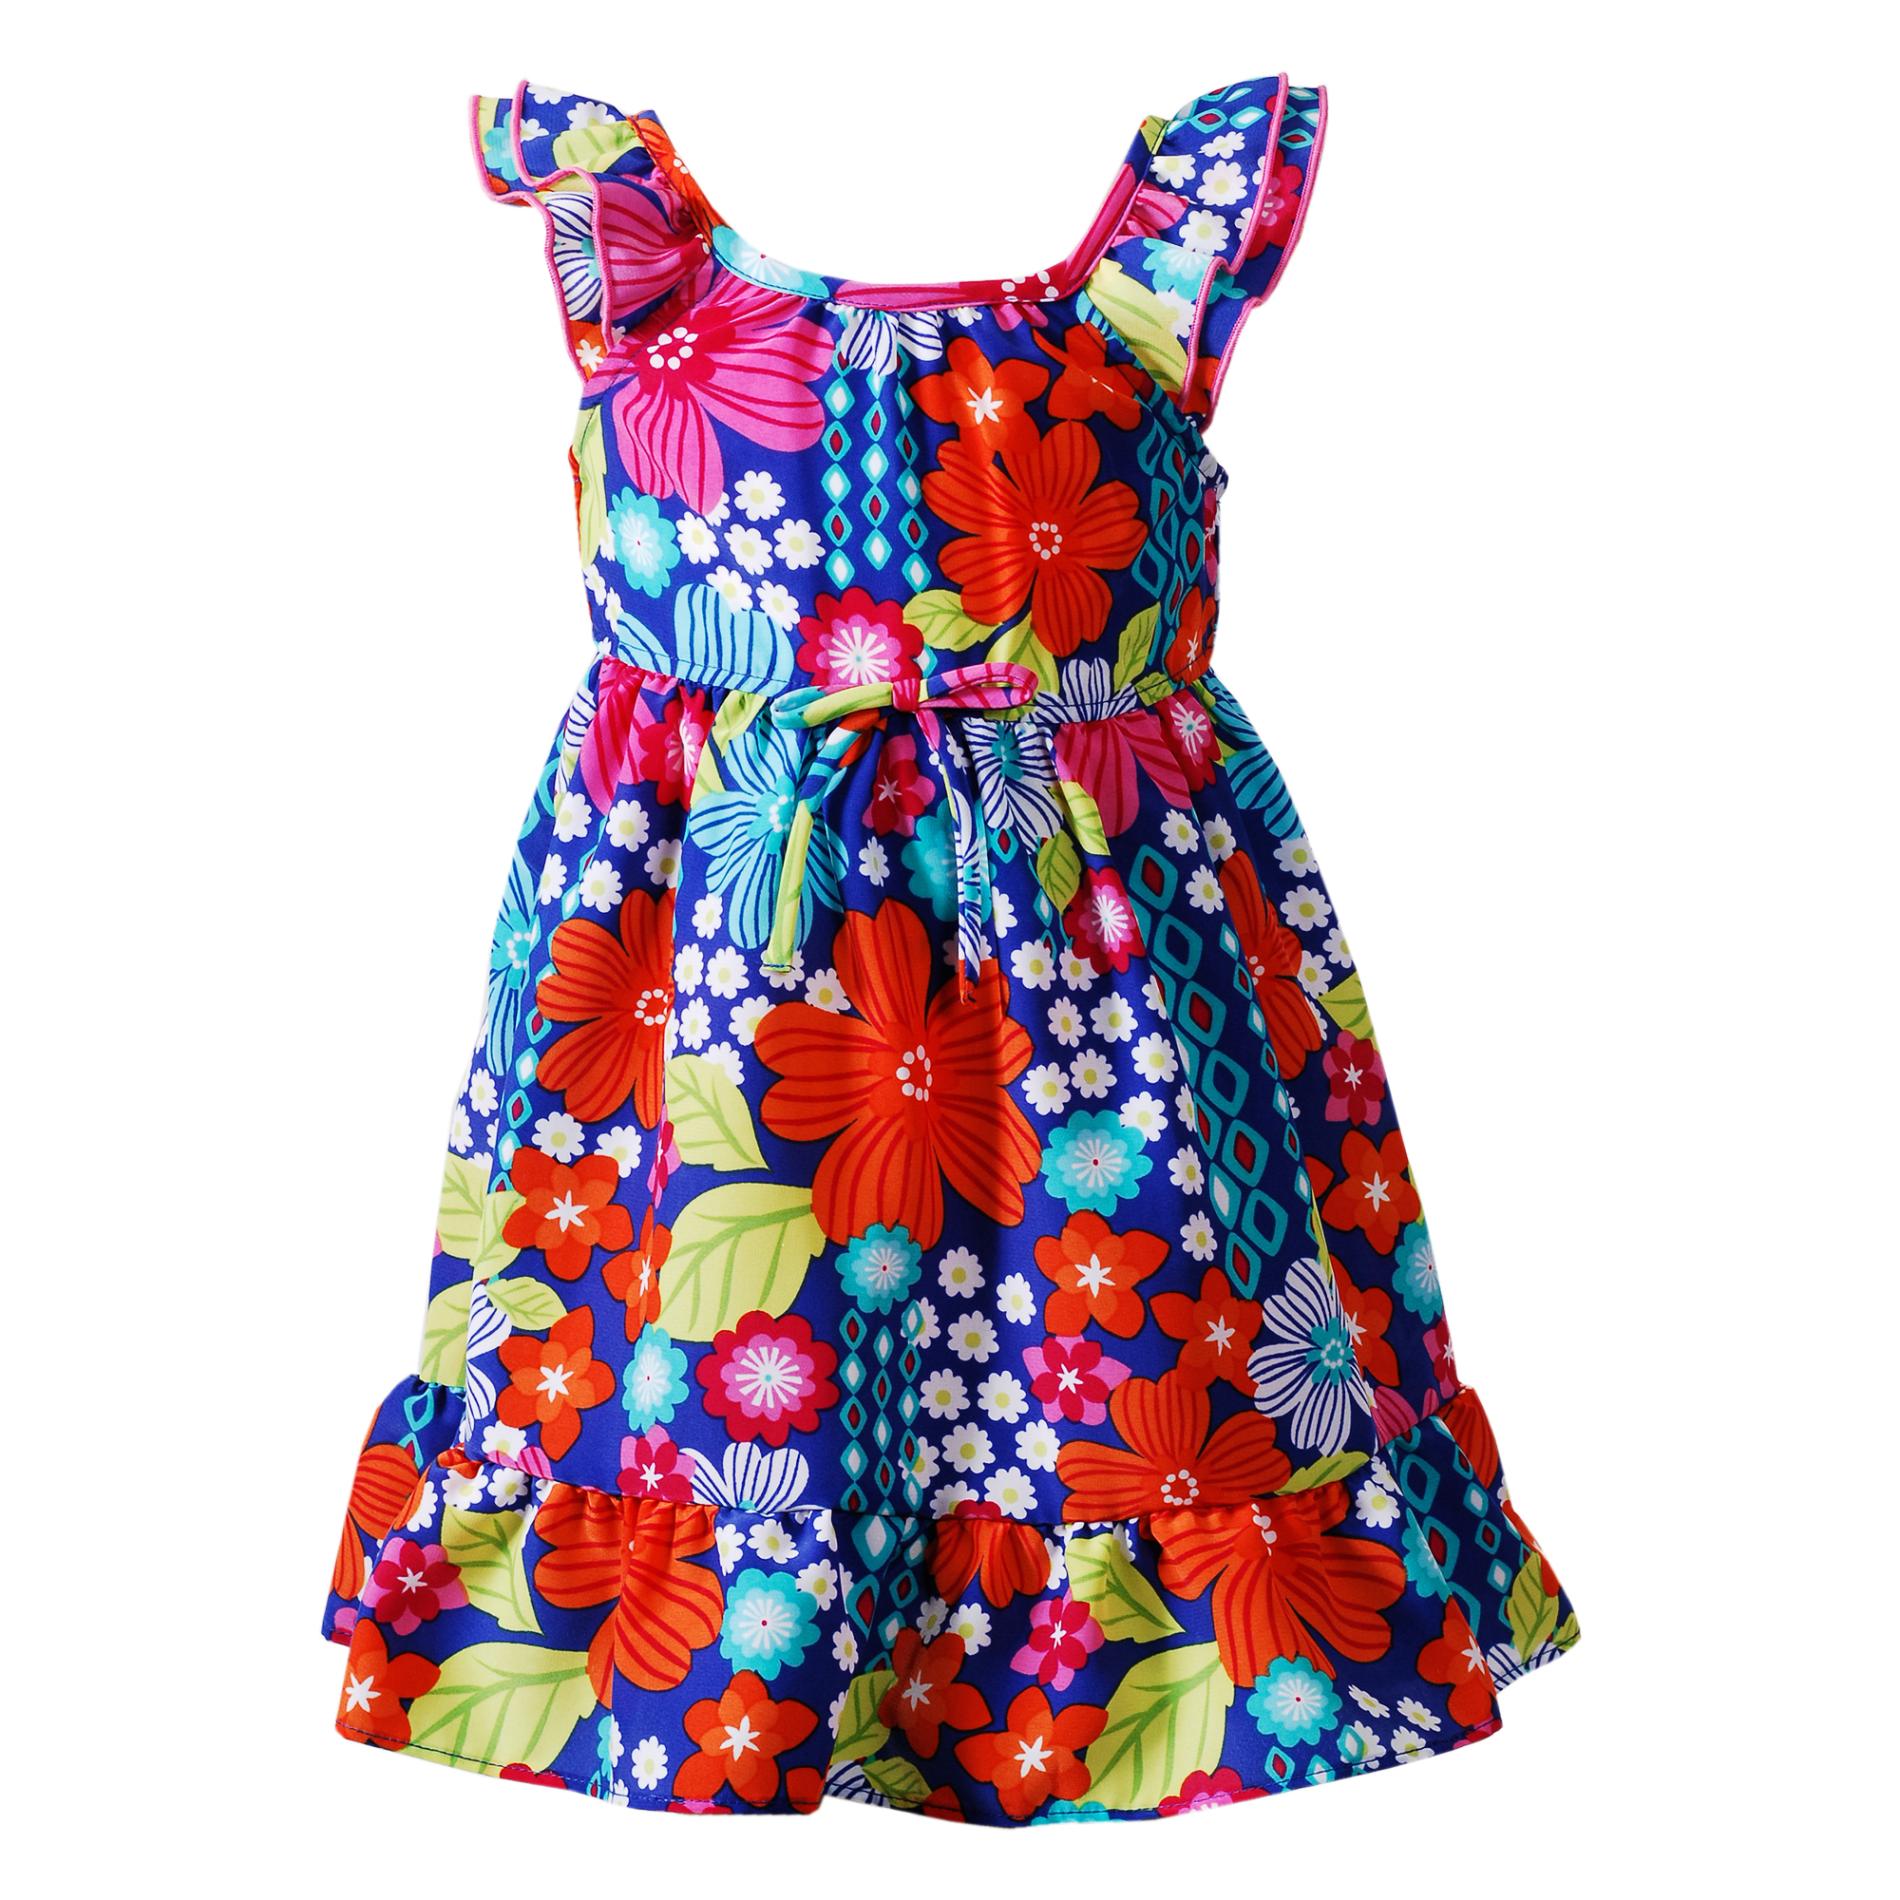 Youngland Infant & Toddler Girl's Sleeveless Dress - Floral